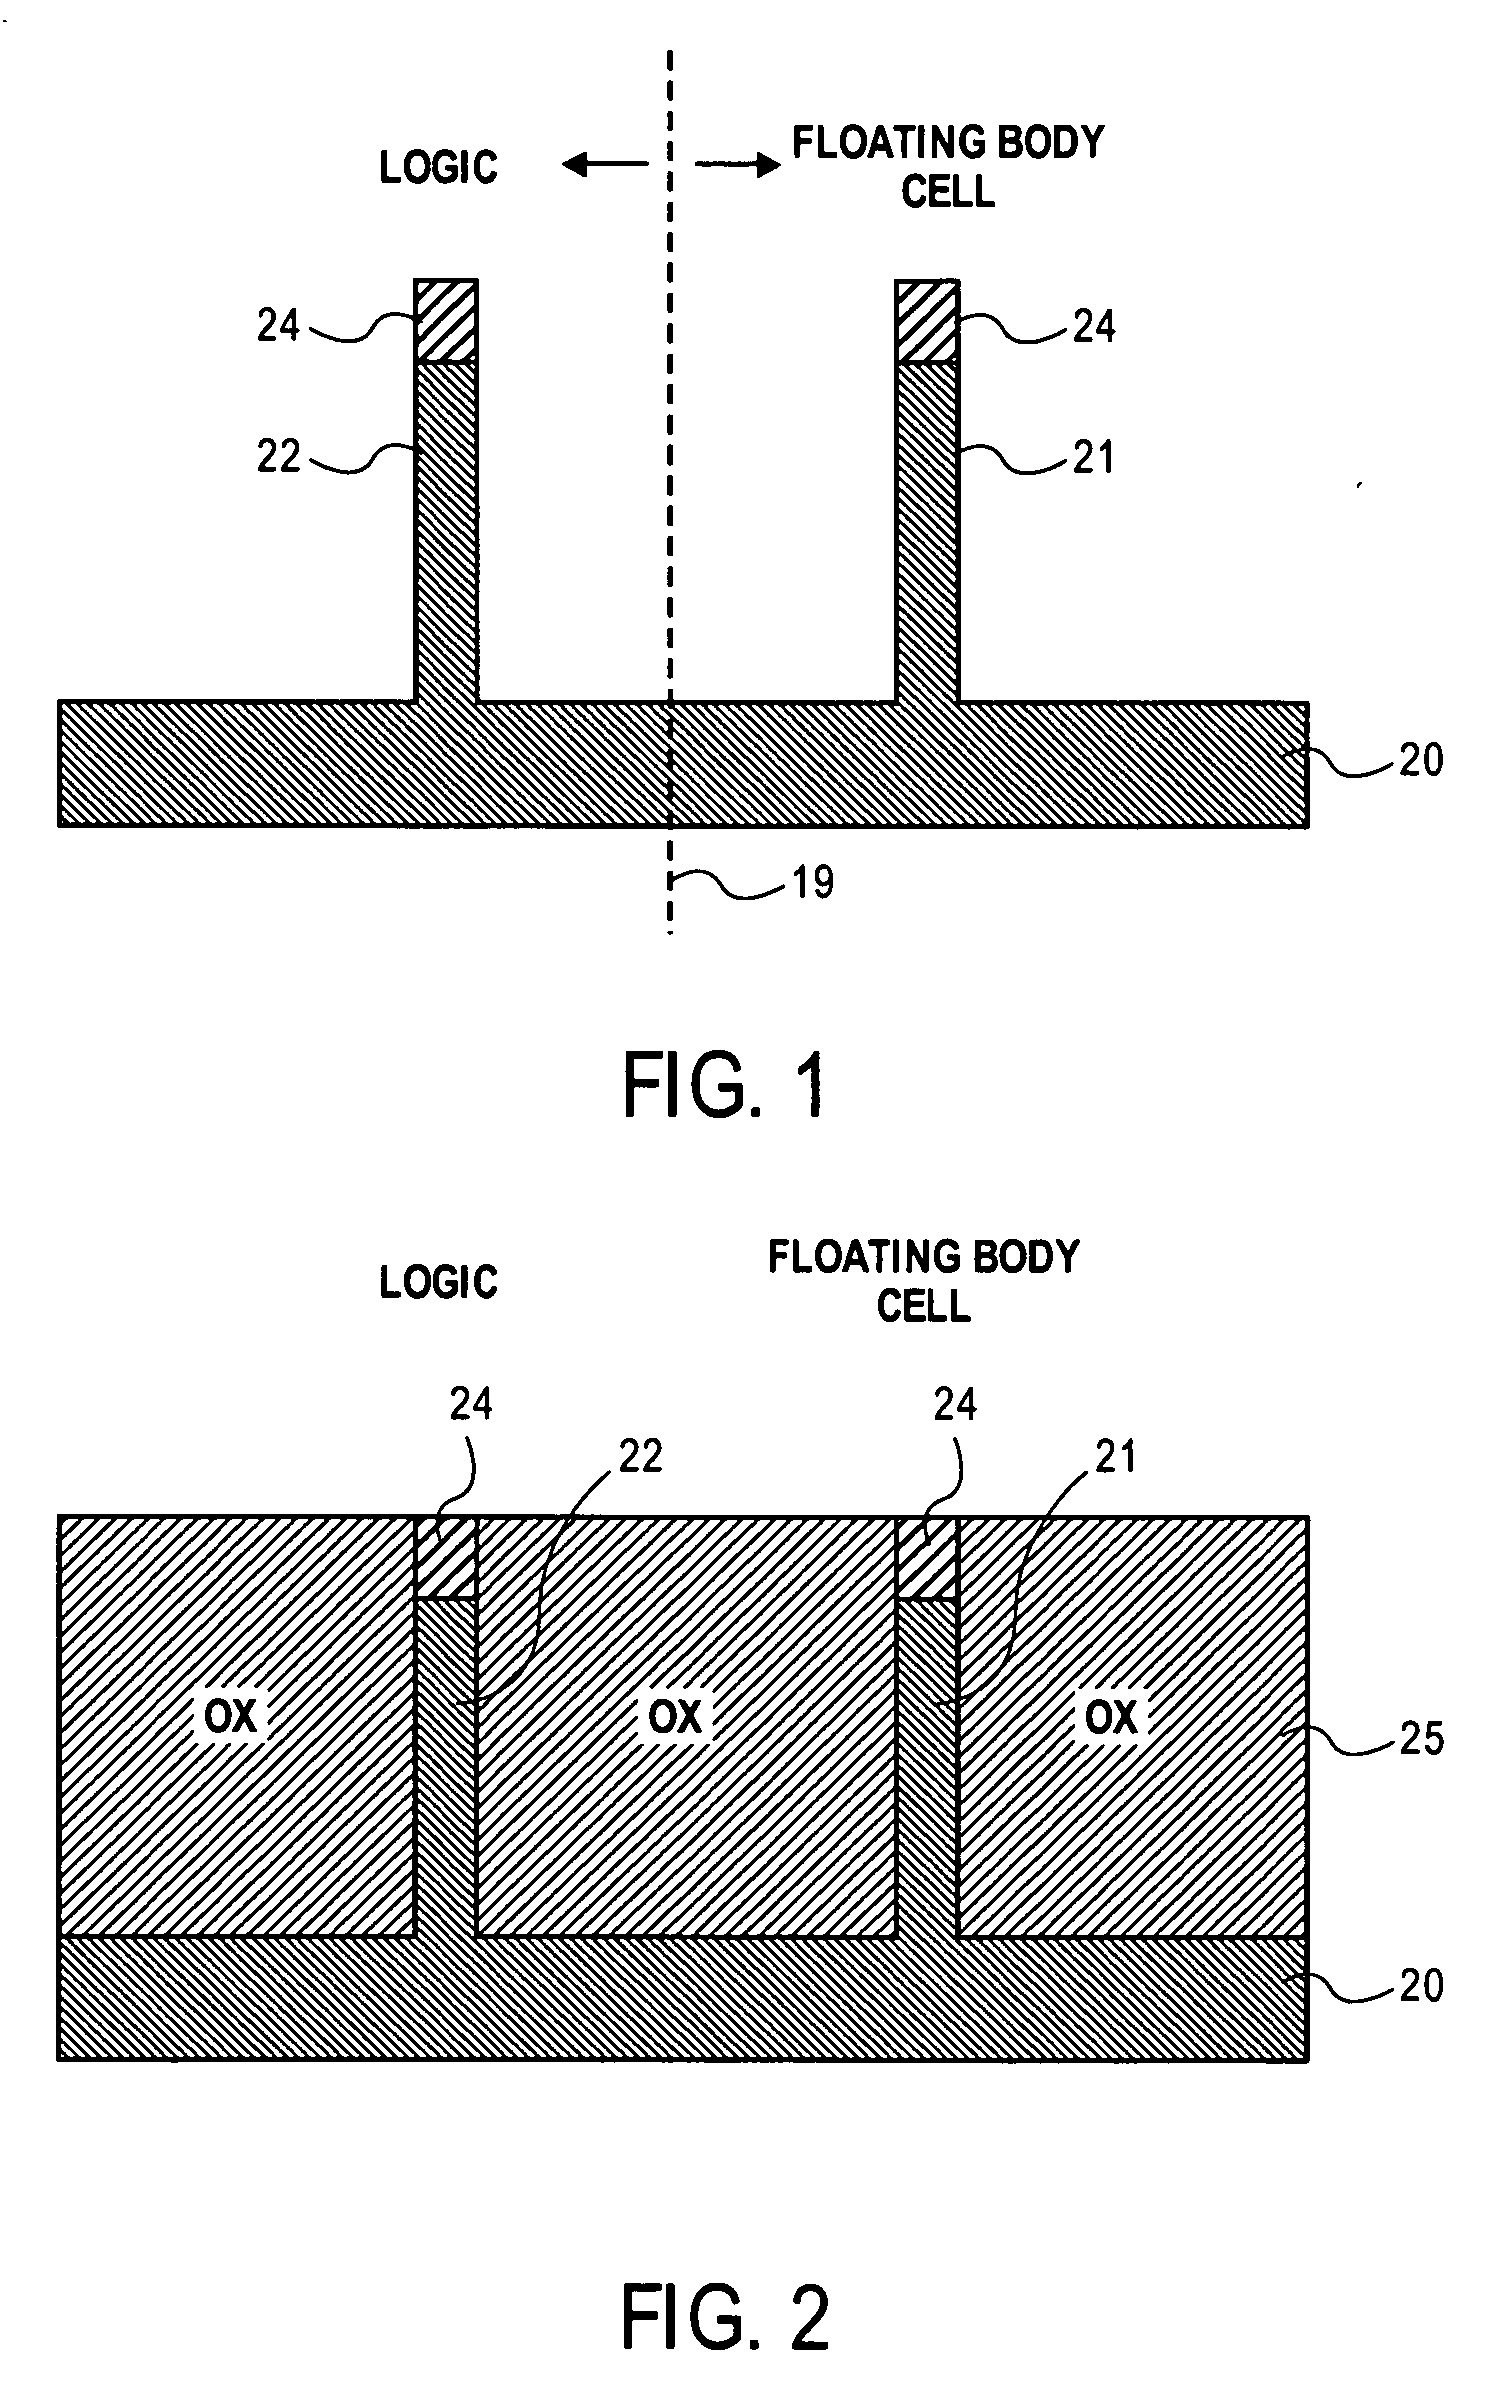 Method of combining floating body cell and logic transistors